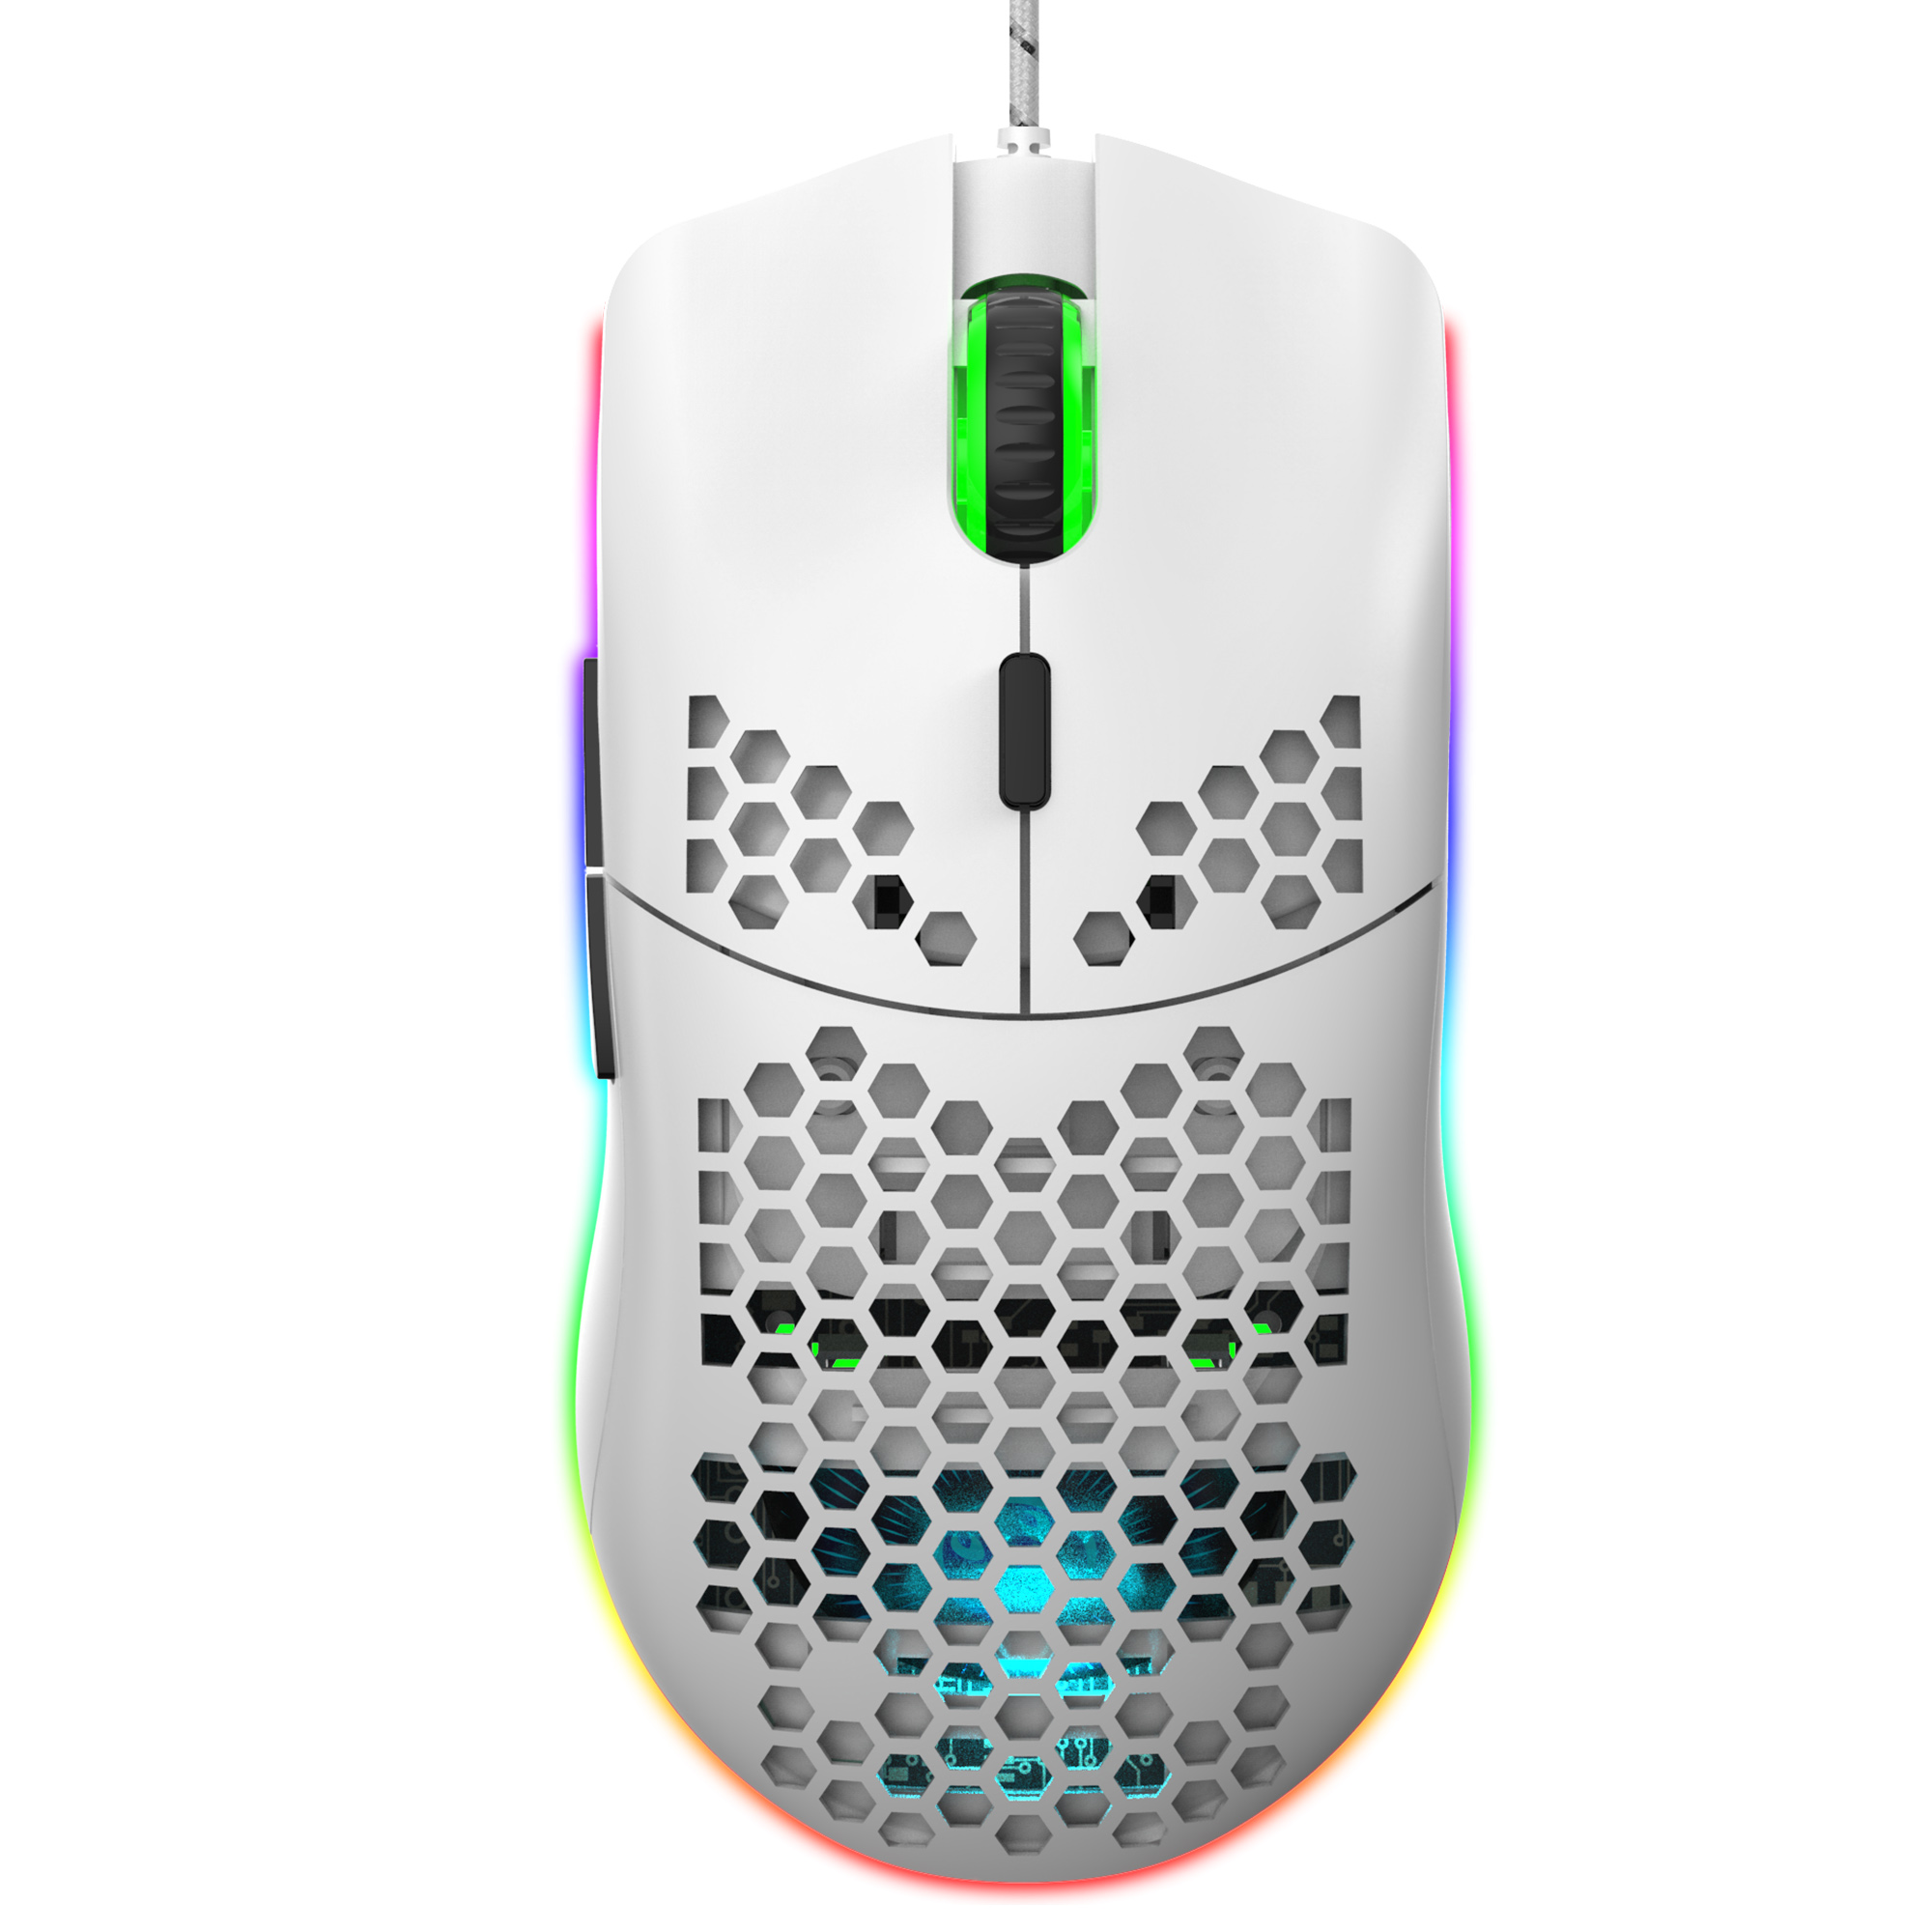 HXSJ J900 Wired Gaming Mouse Six-Key Macro Programming Mouse Six Level Adjustable DPI Colorful RGB White Gaming Mouse